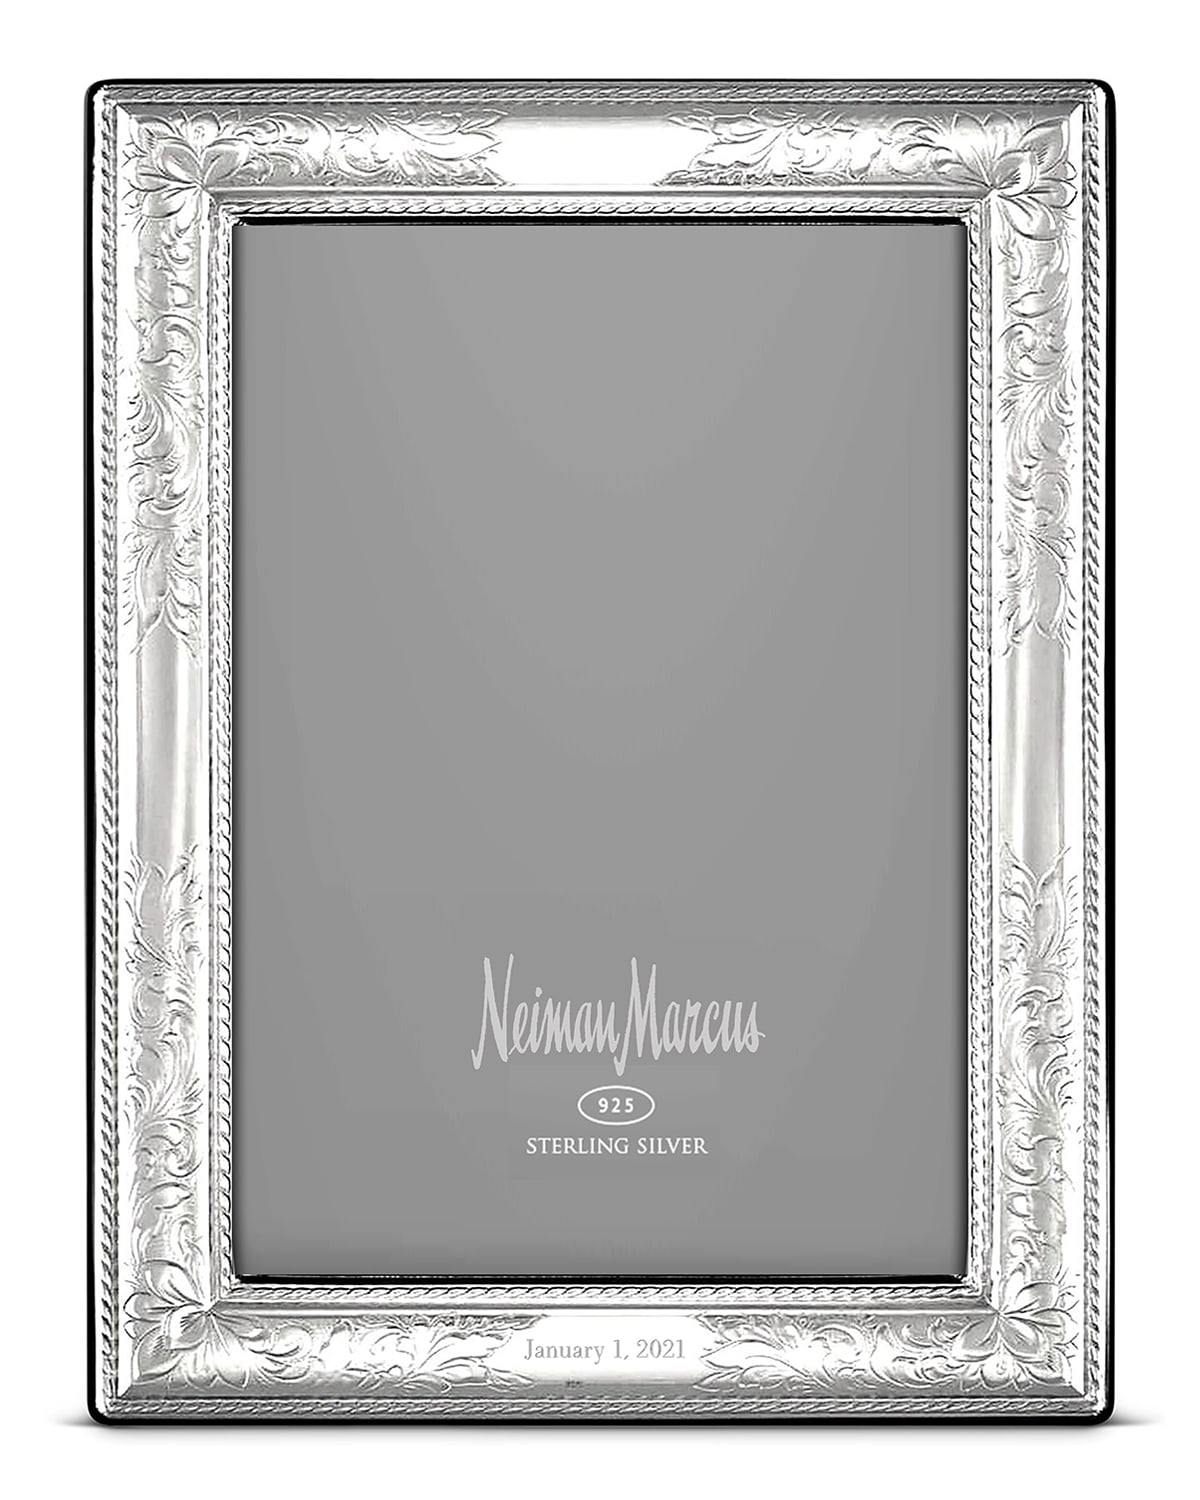 Cunill America Vintage Personalized Frame, 5" X 7" In Silver Block Font